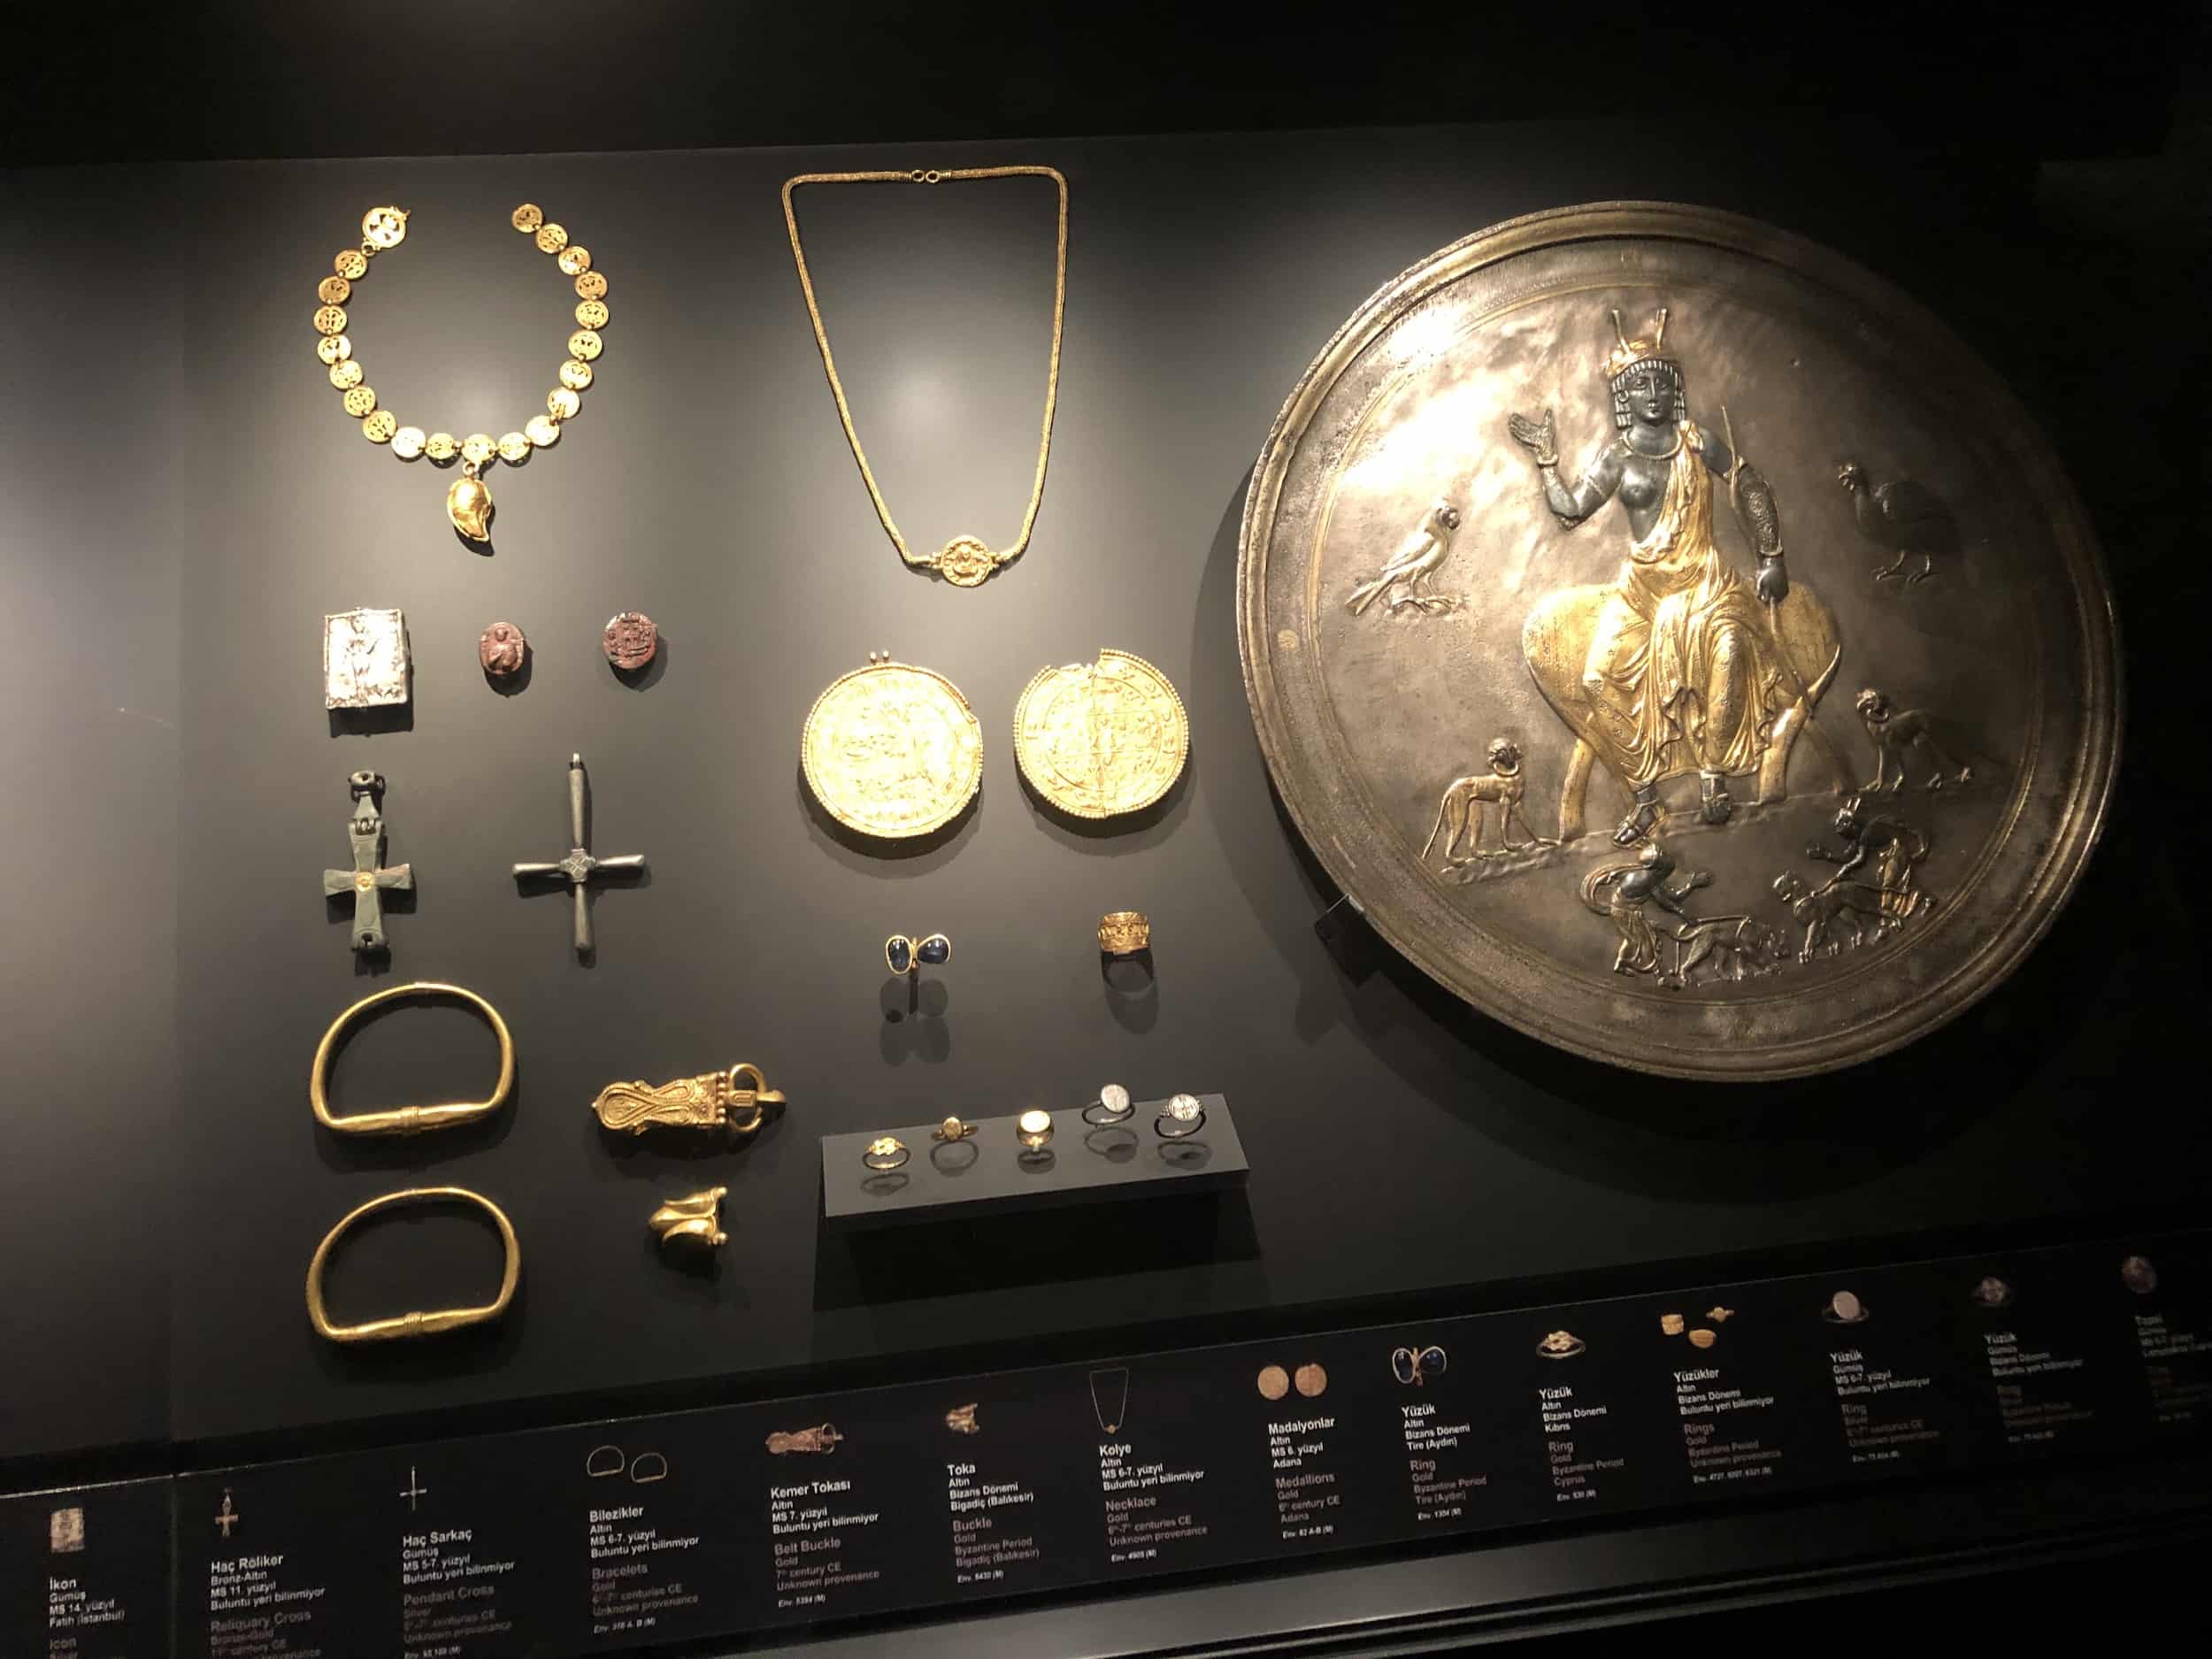 Byzantine period jewelry from various ancient cities